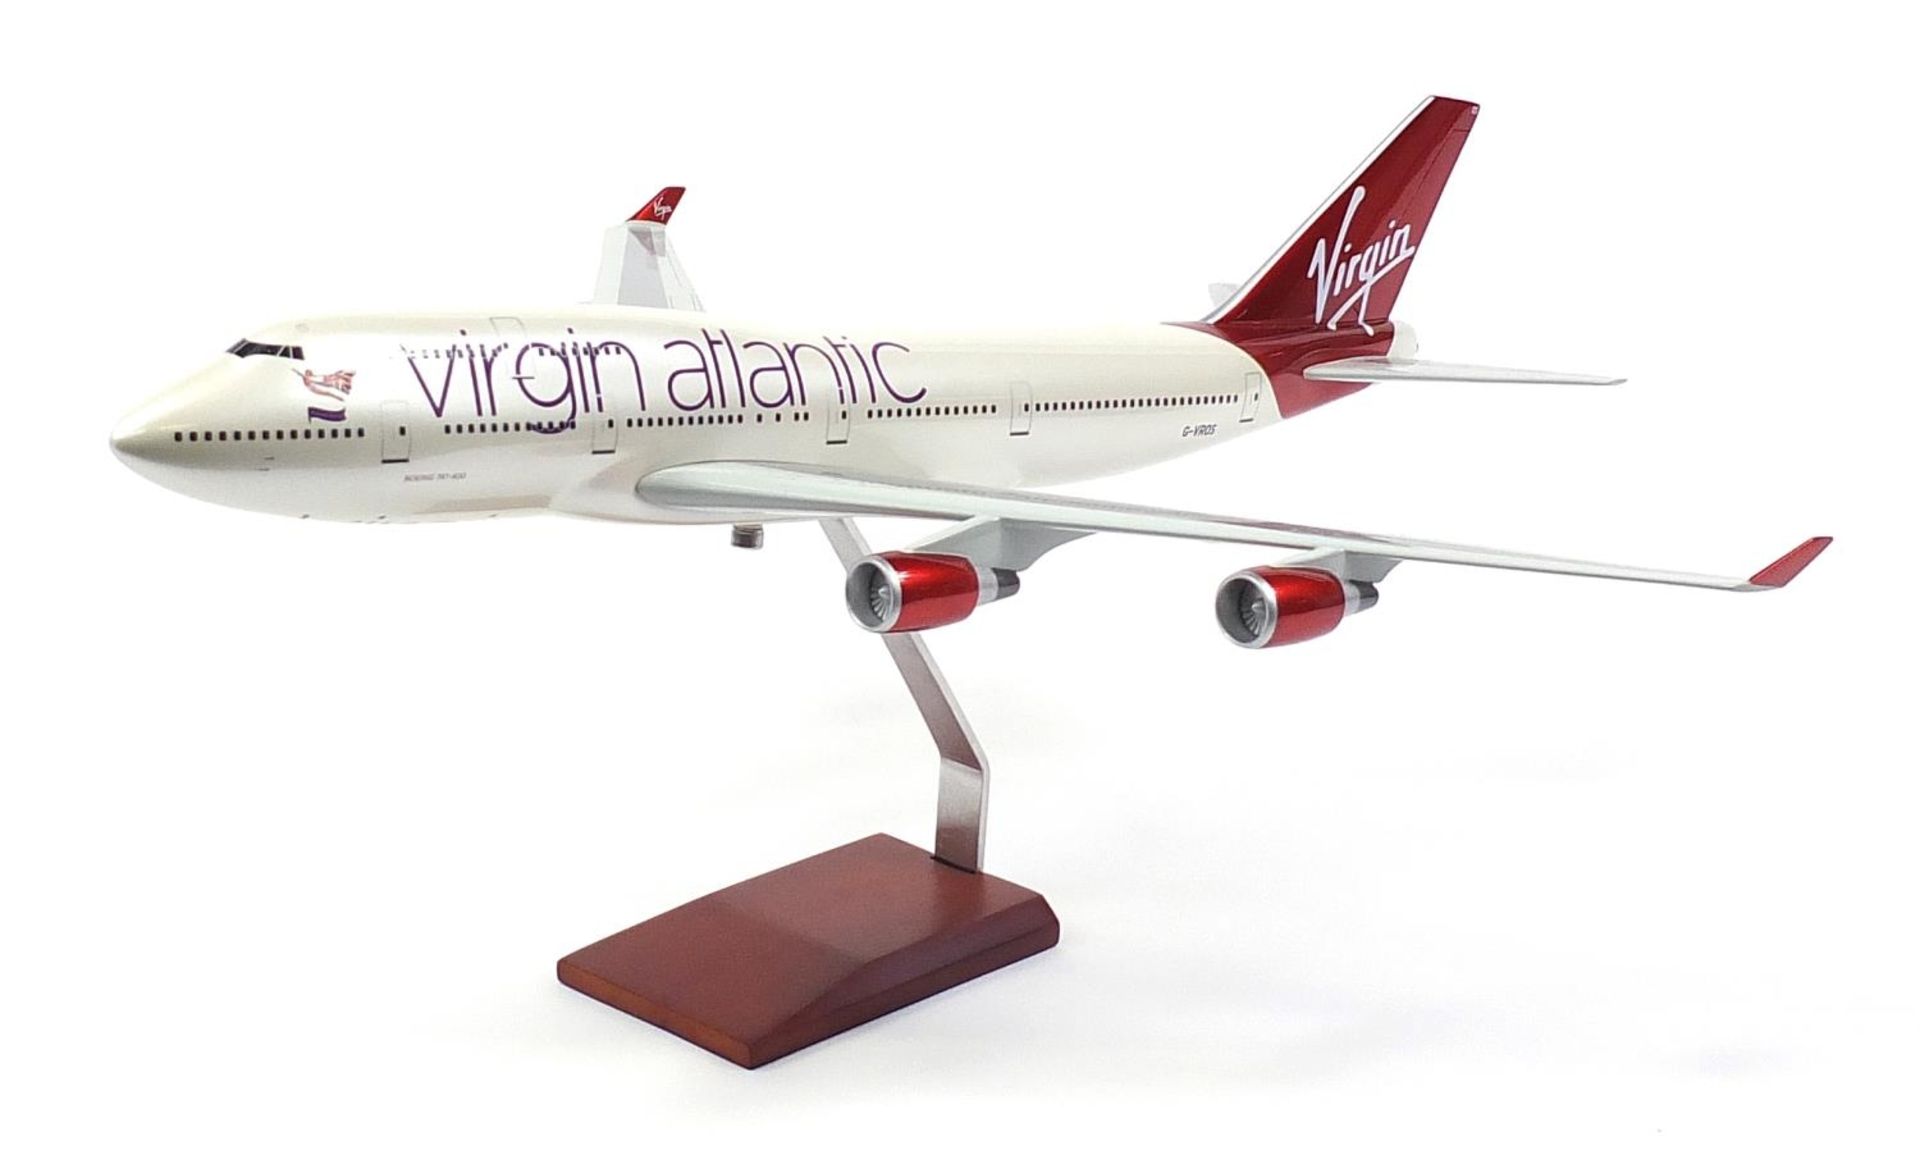 Boeing 747-400 Virgin Atlantic model aeroplane, given to the vendor as a retirement gift, 72cm in